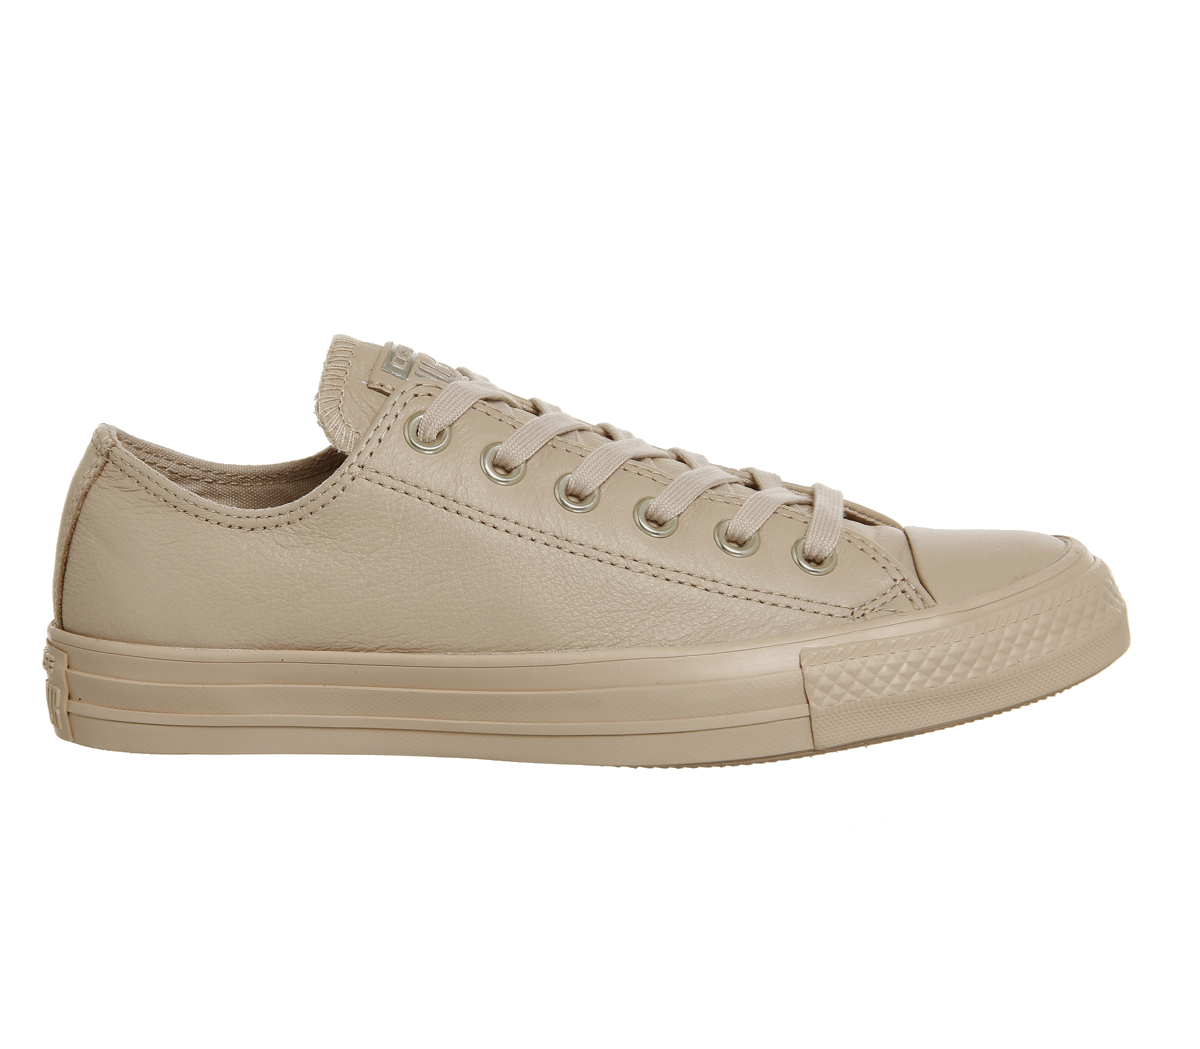 converse all star low leather ivory cream light gold